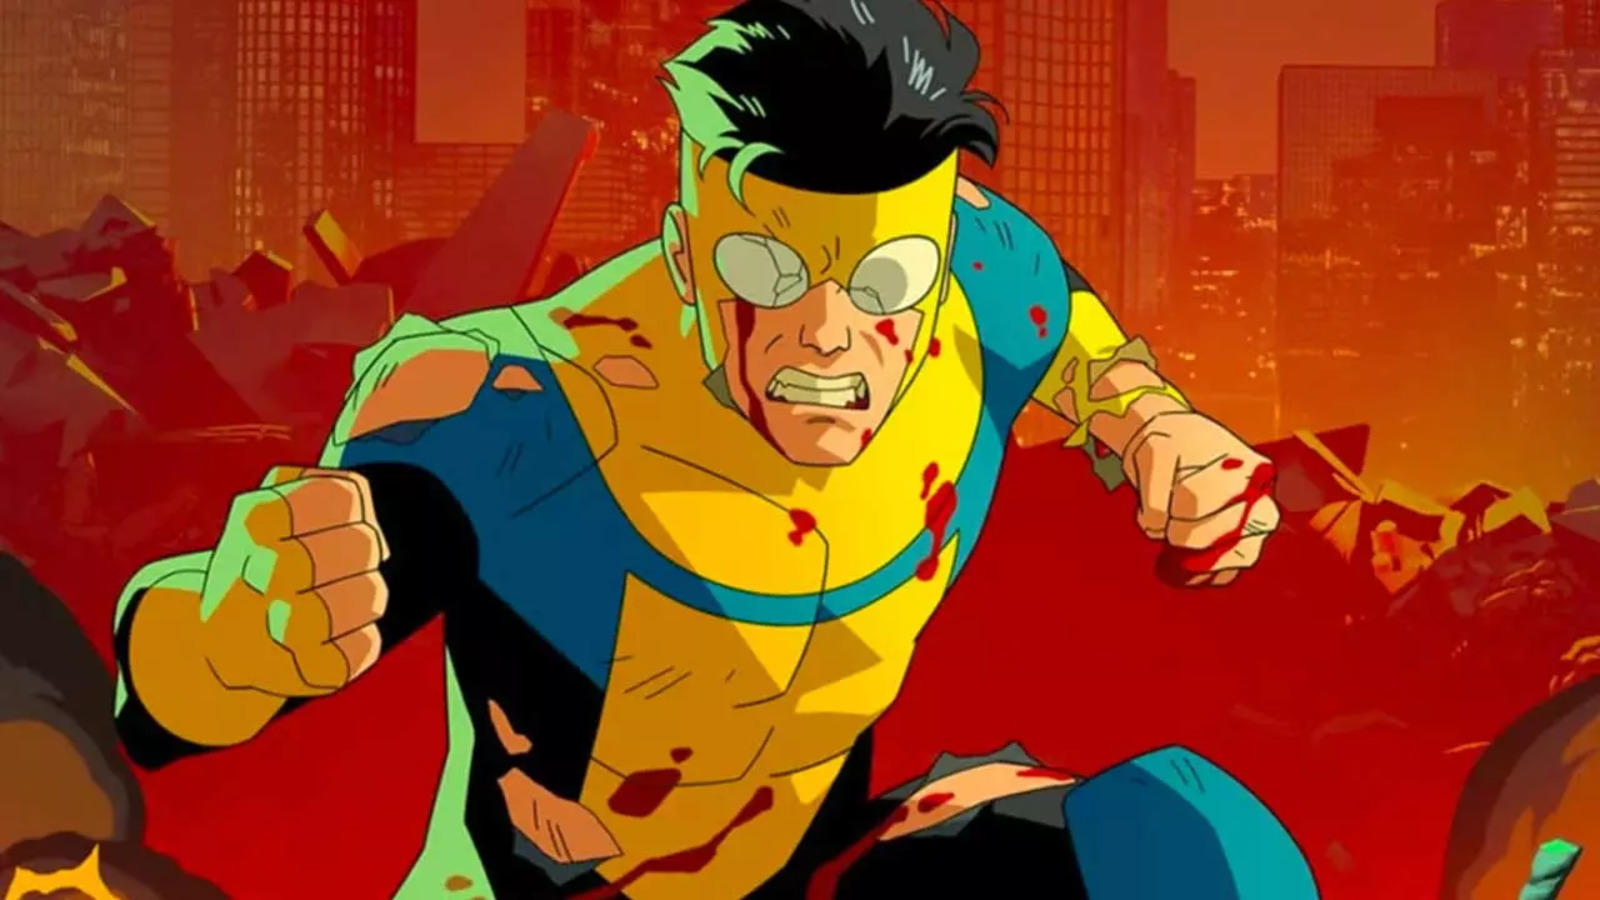 Invincible Season 2 Part 2 The Countdown Begins for the Much-Anticipated Return